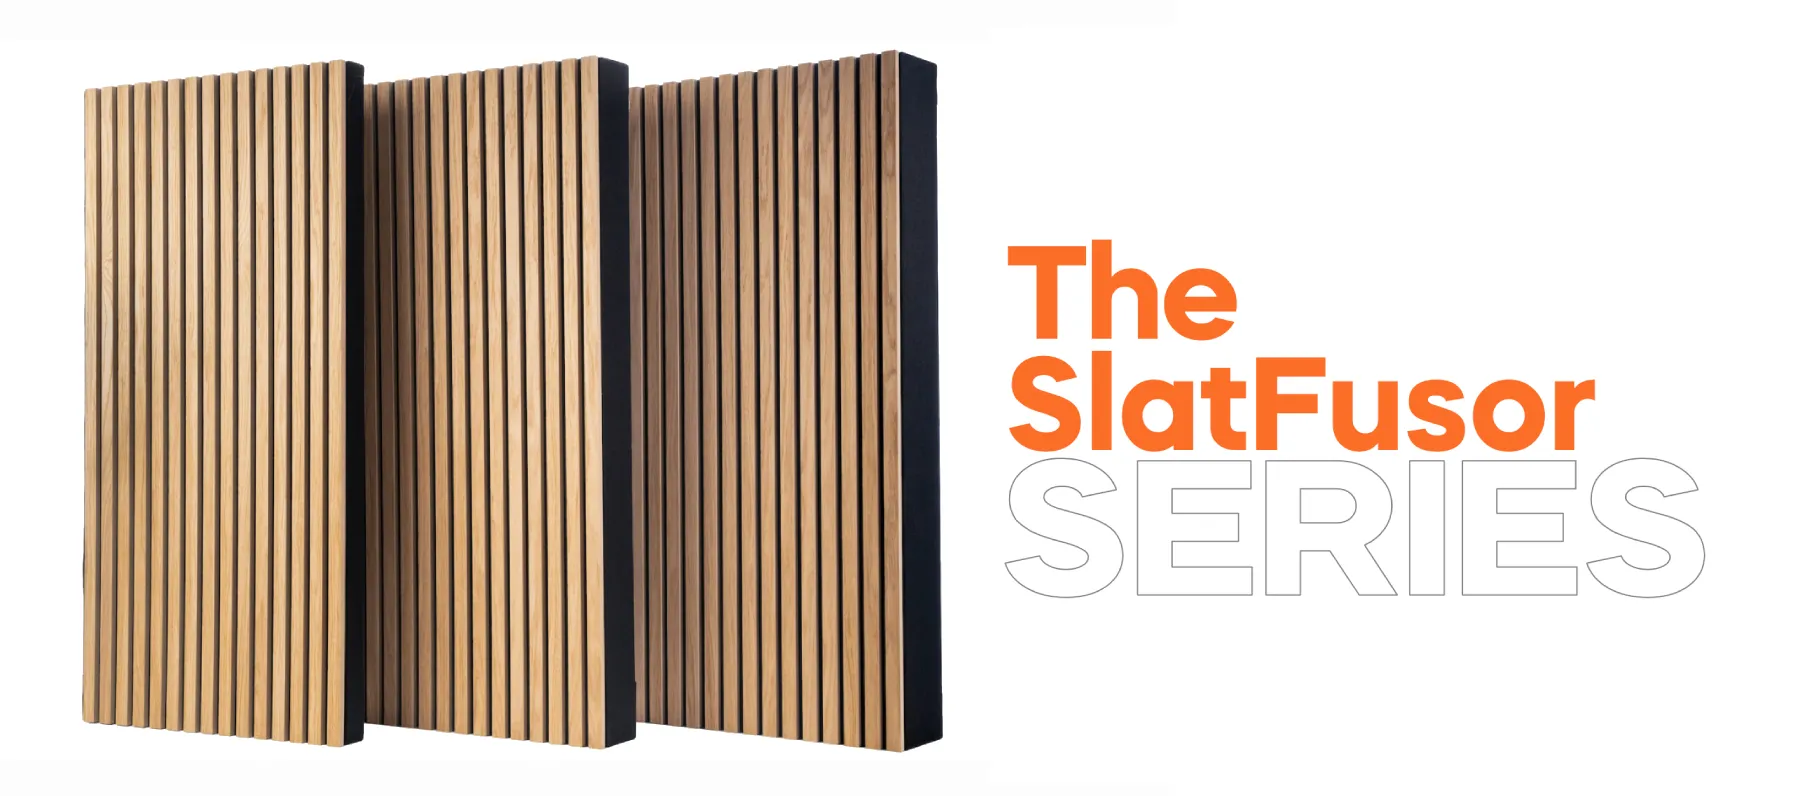 Wooden acoustic panels: Sound absorbers & diffusers - PlyProject